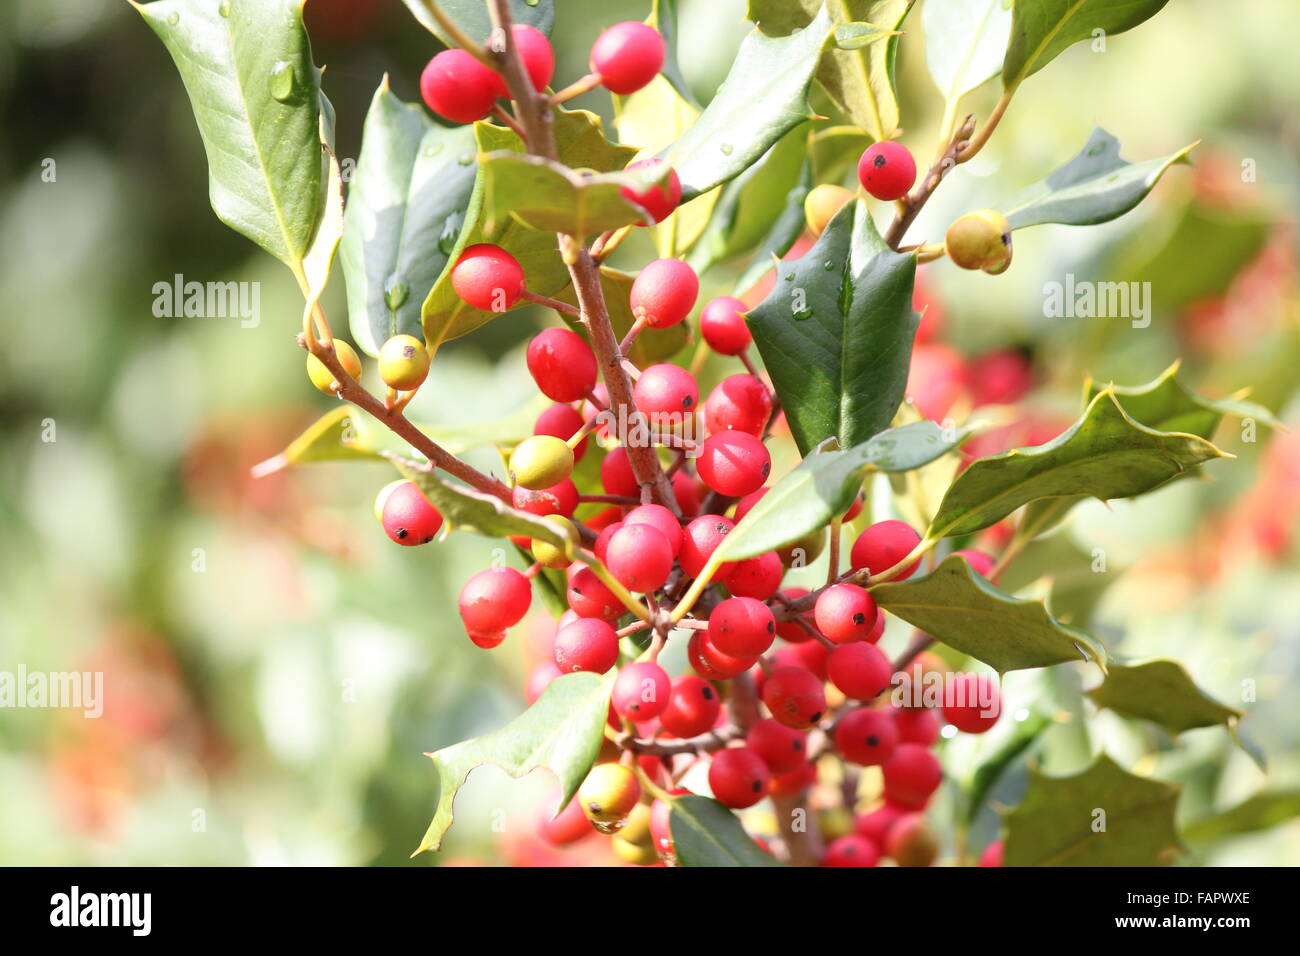 The American holly, (Ilex opaca) is a species of holly, native to the eastern and south-central United States. Stock Photo